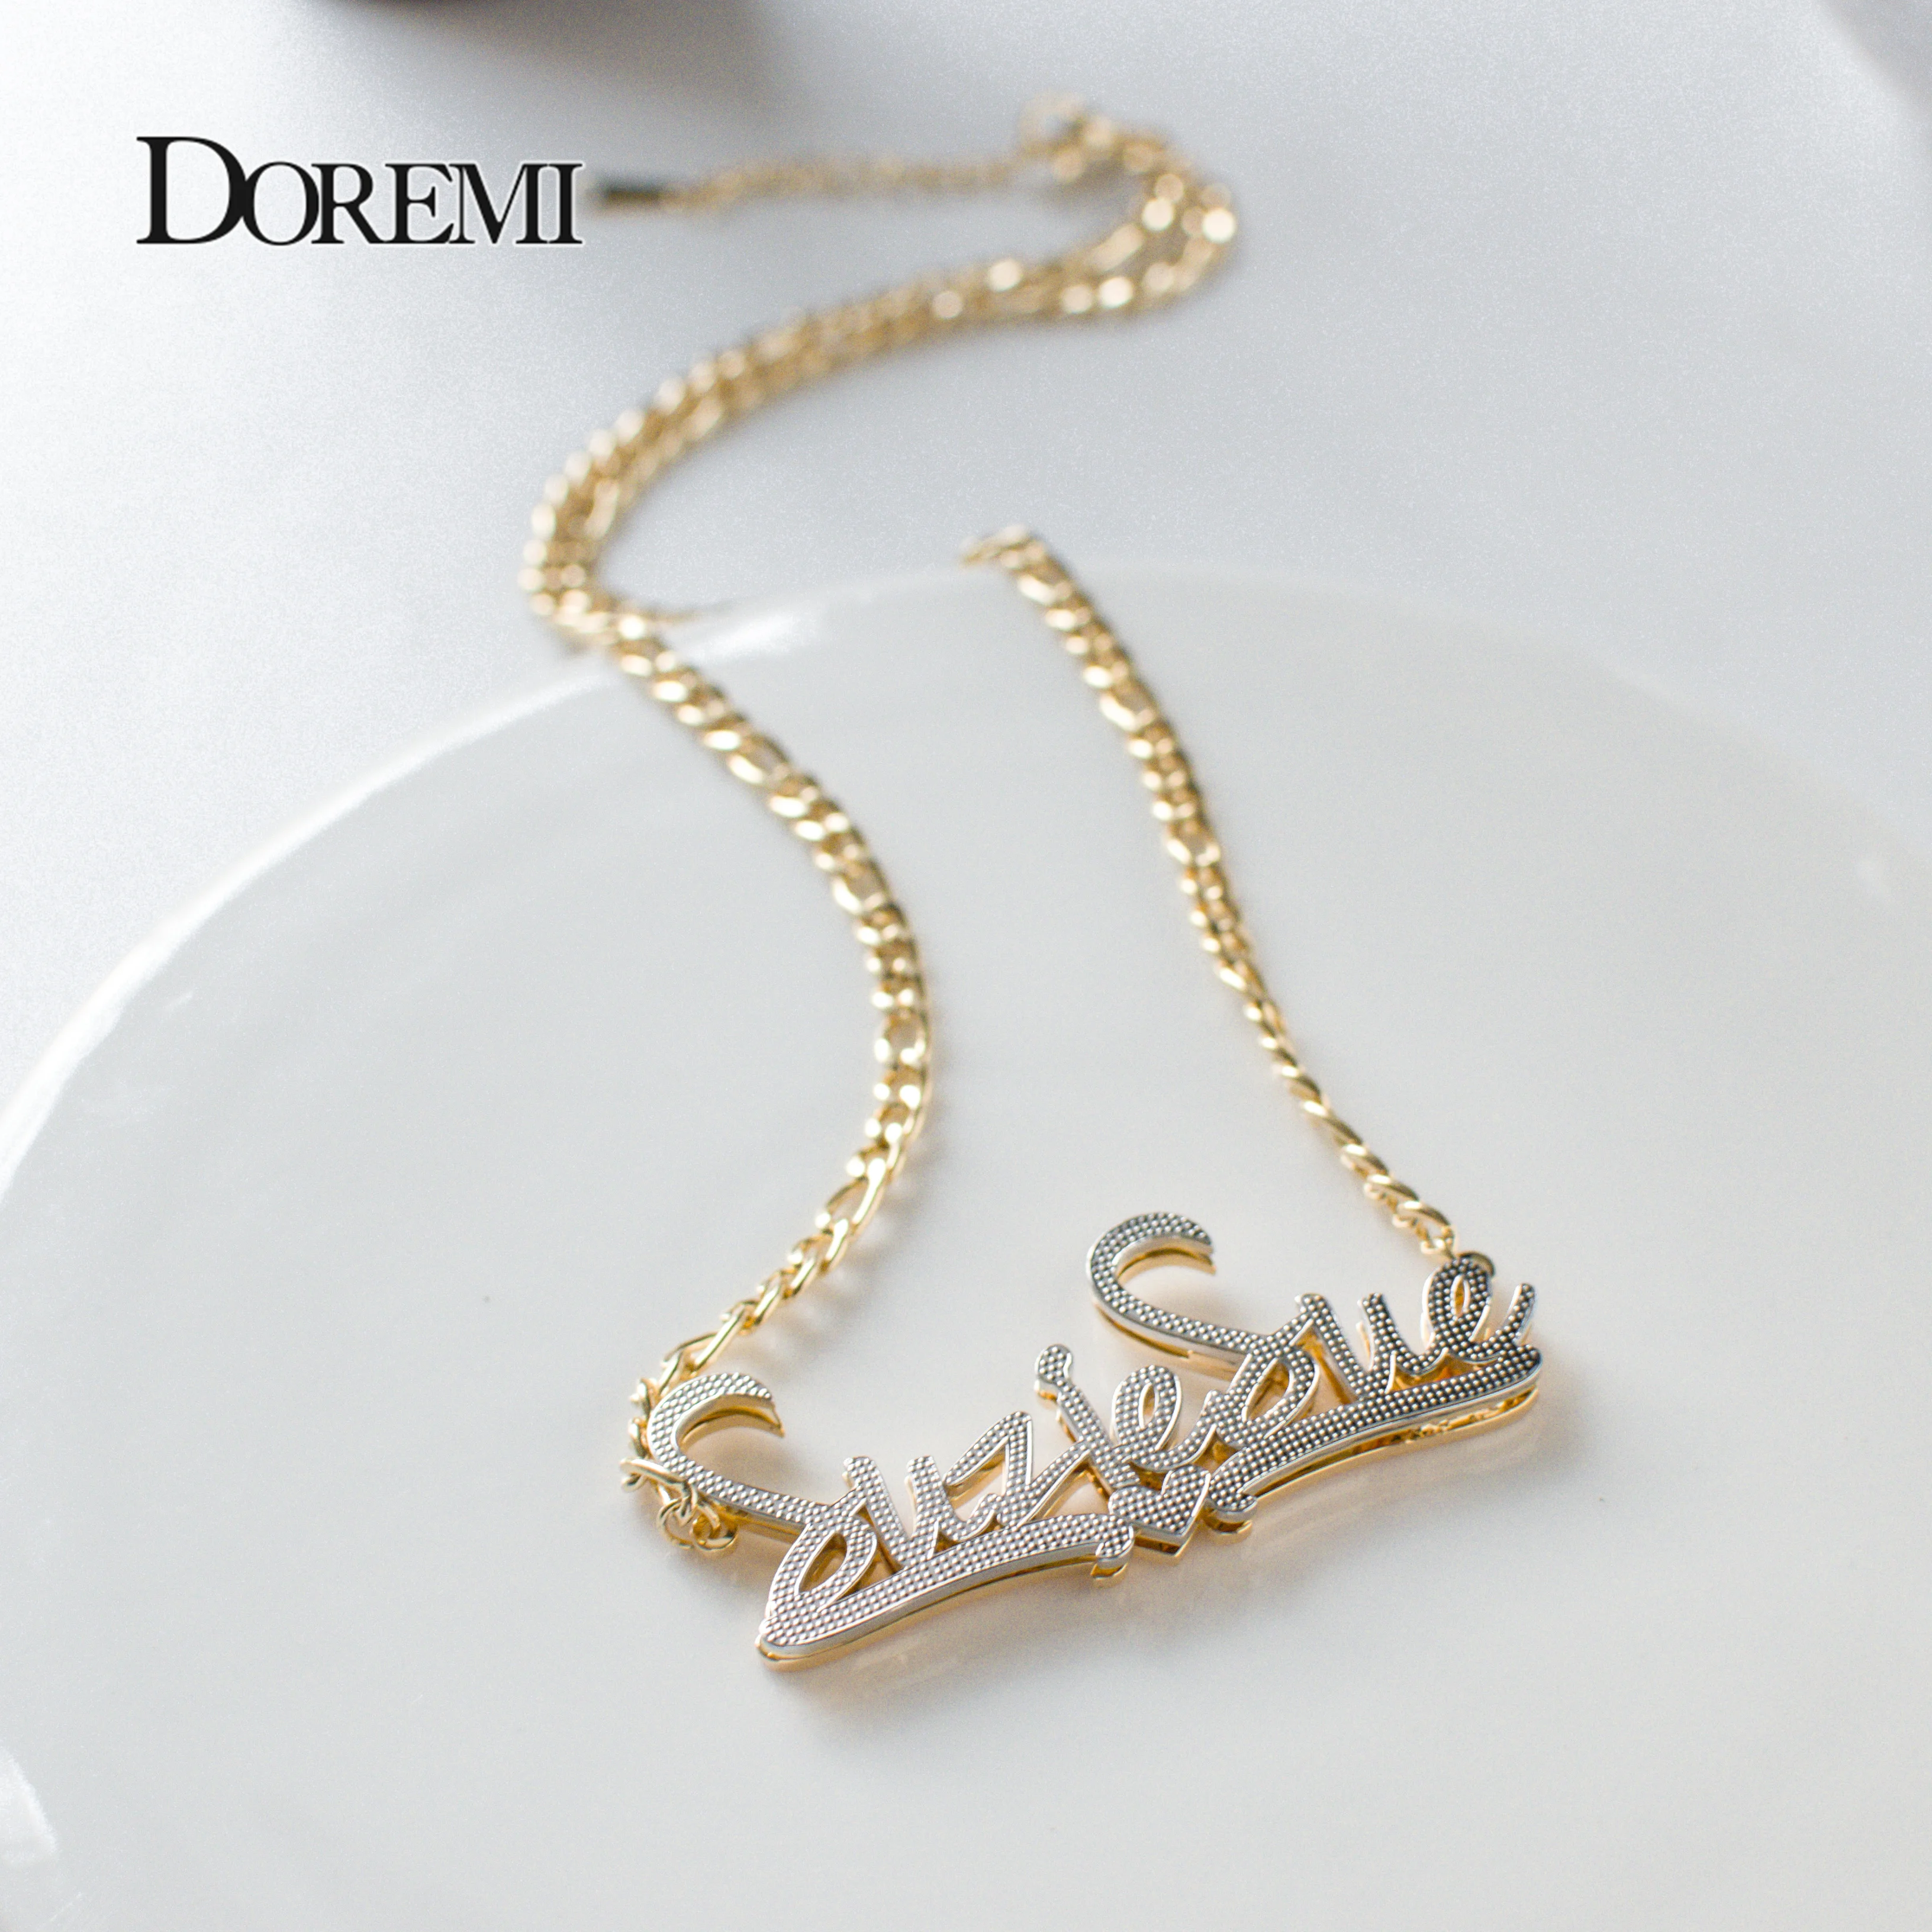 DOREMI 2 Toned 304 Stainless Name Necklace Heart Nameplate Personalized Pendant Double Layer Custom Jewelry Valentine's Day Gift vintage jewelry box antique heart shaped treasure organizer classic heart shape metal gift box for valentine s day festivals